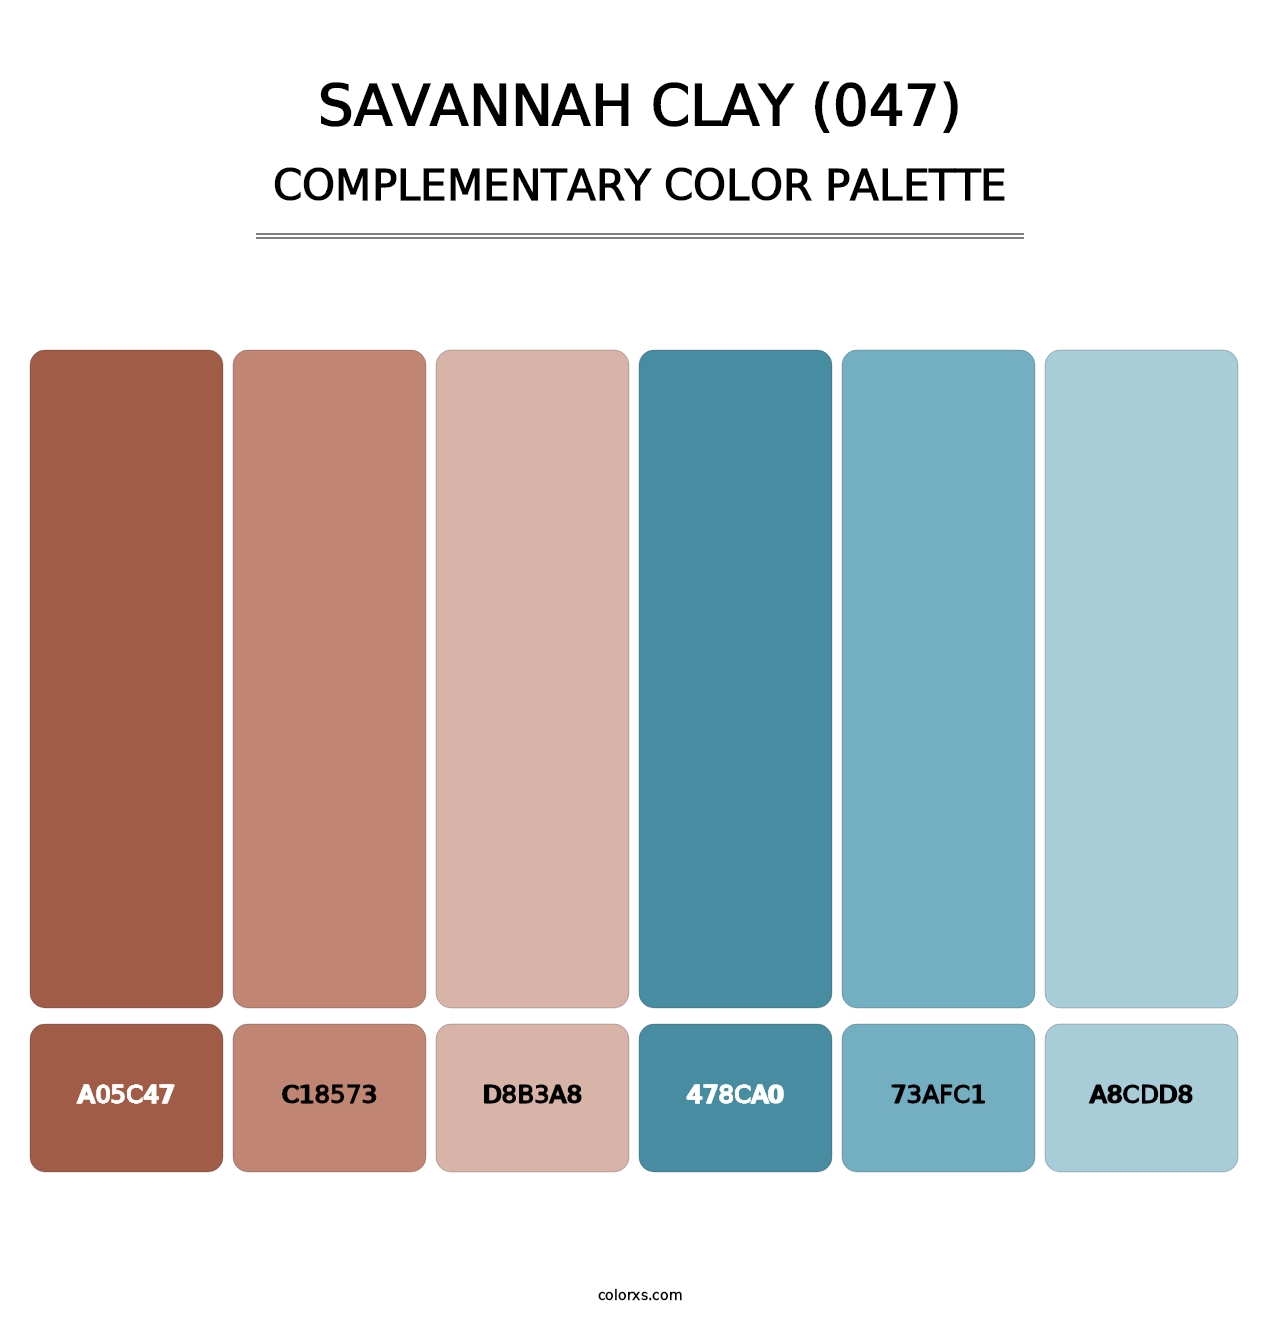 Savannah Clay (047) - Complementary Color Palette